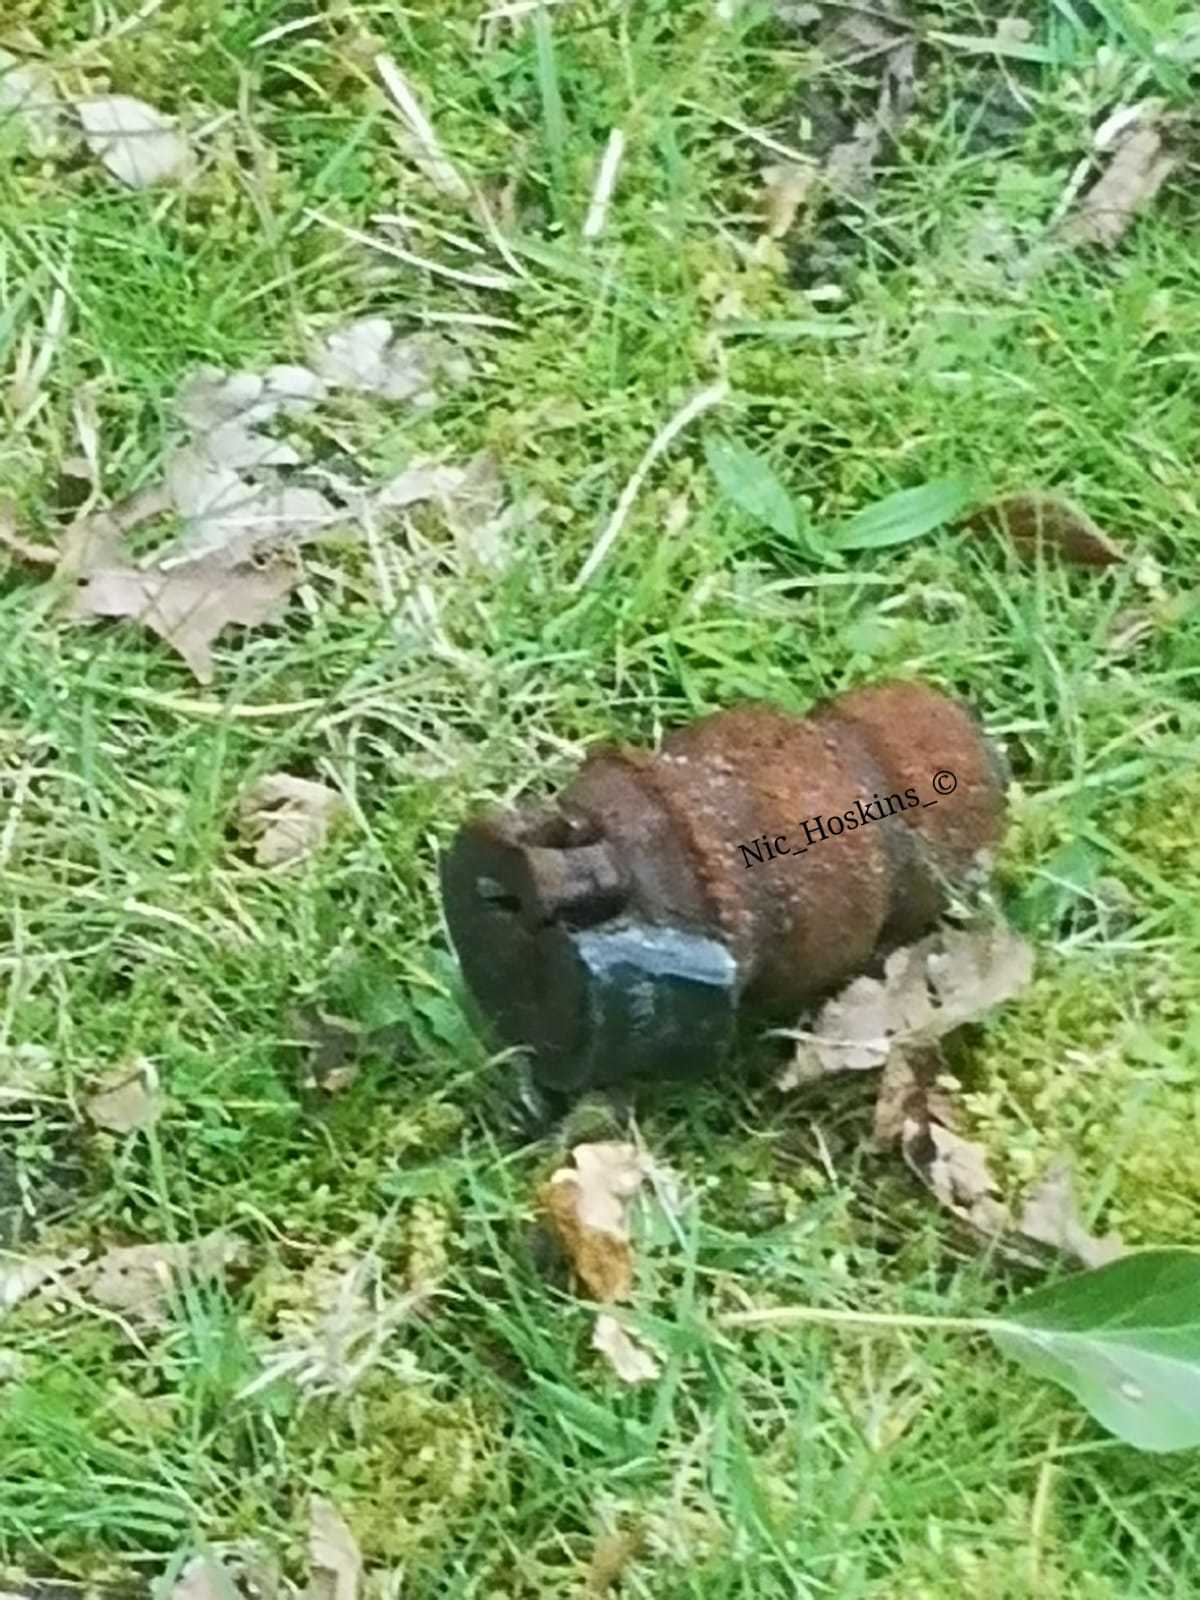 Suspected device found in Saffron Road, Bracknell. Pic by Nic Hoskins